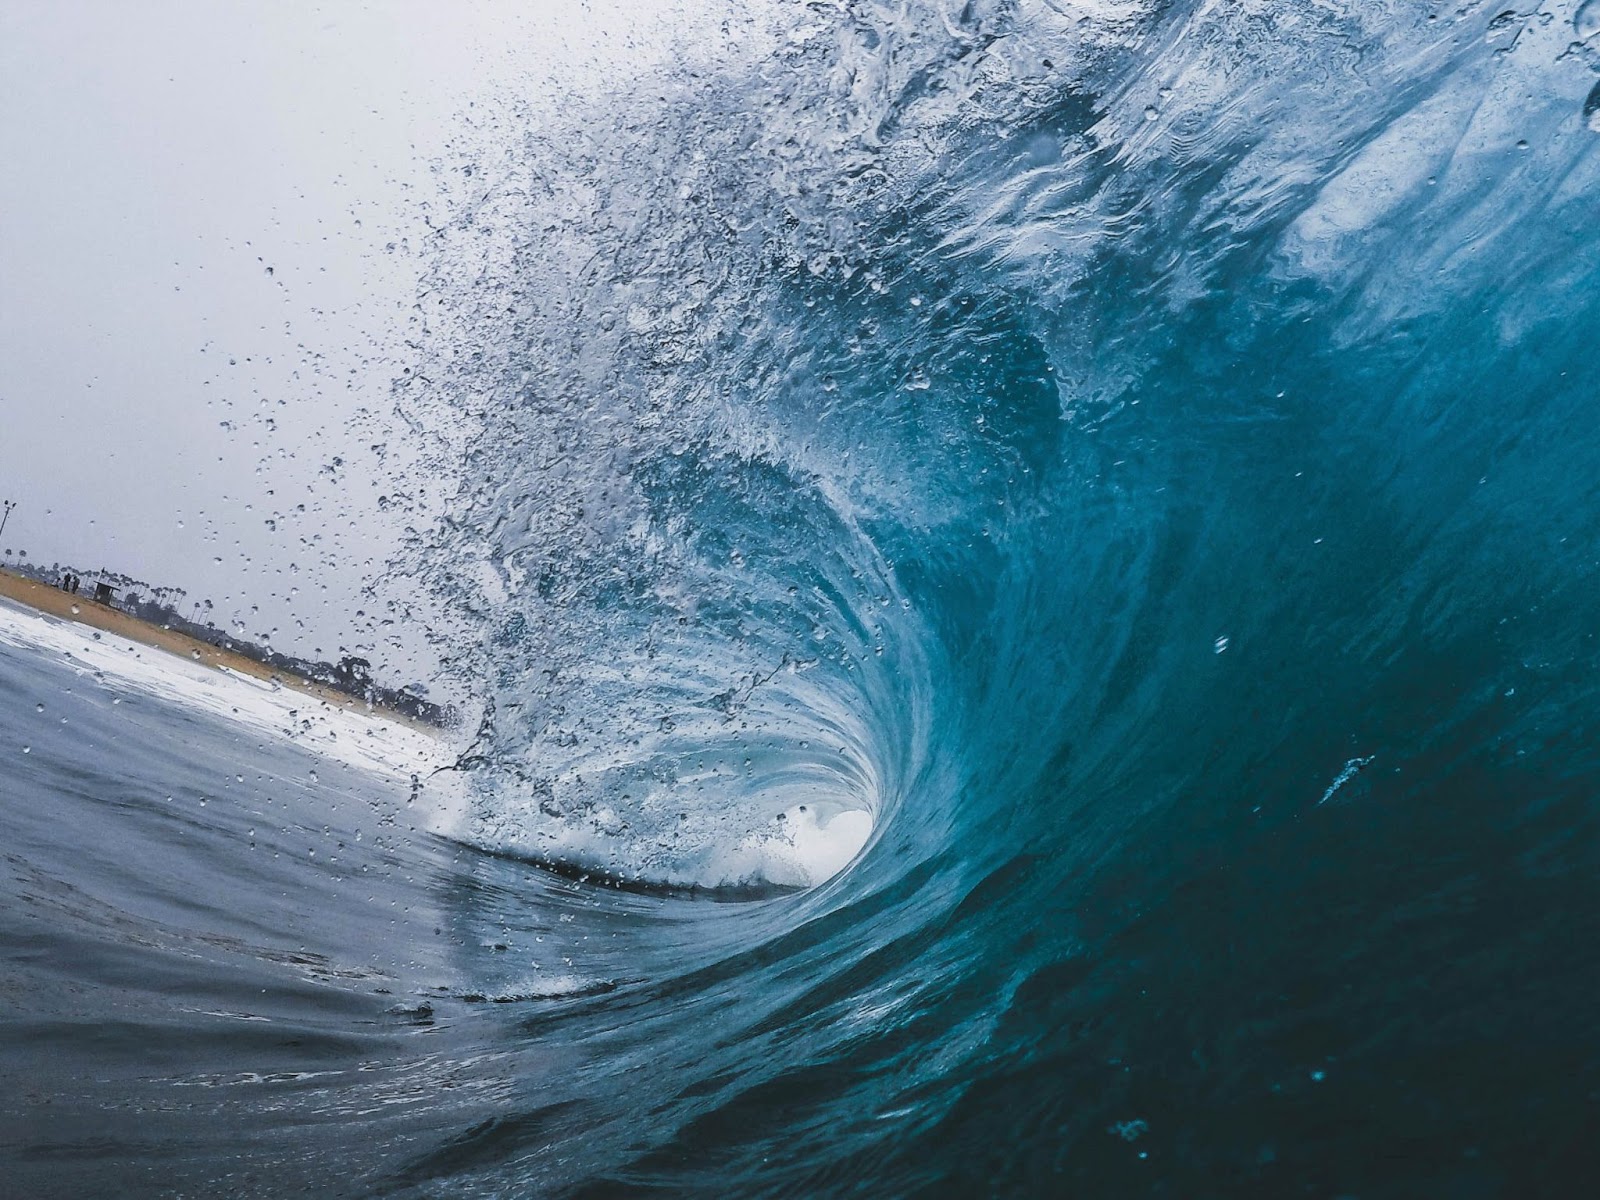 The barrel of a crystal blue wave crashing down towards the shore, with the crest spraying water.